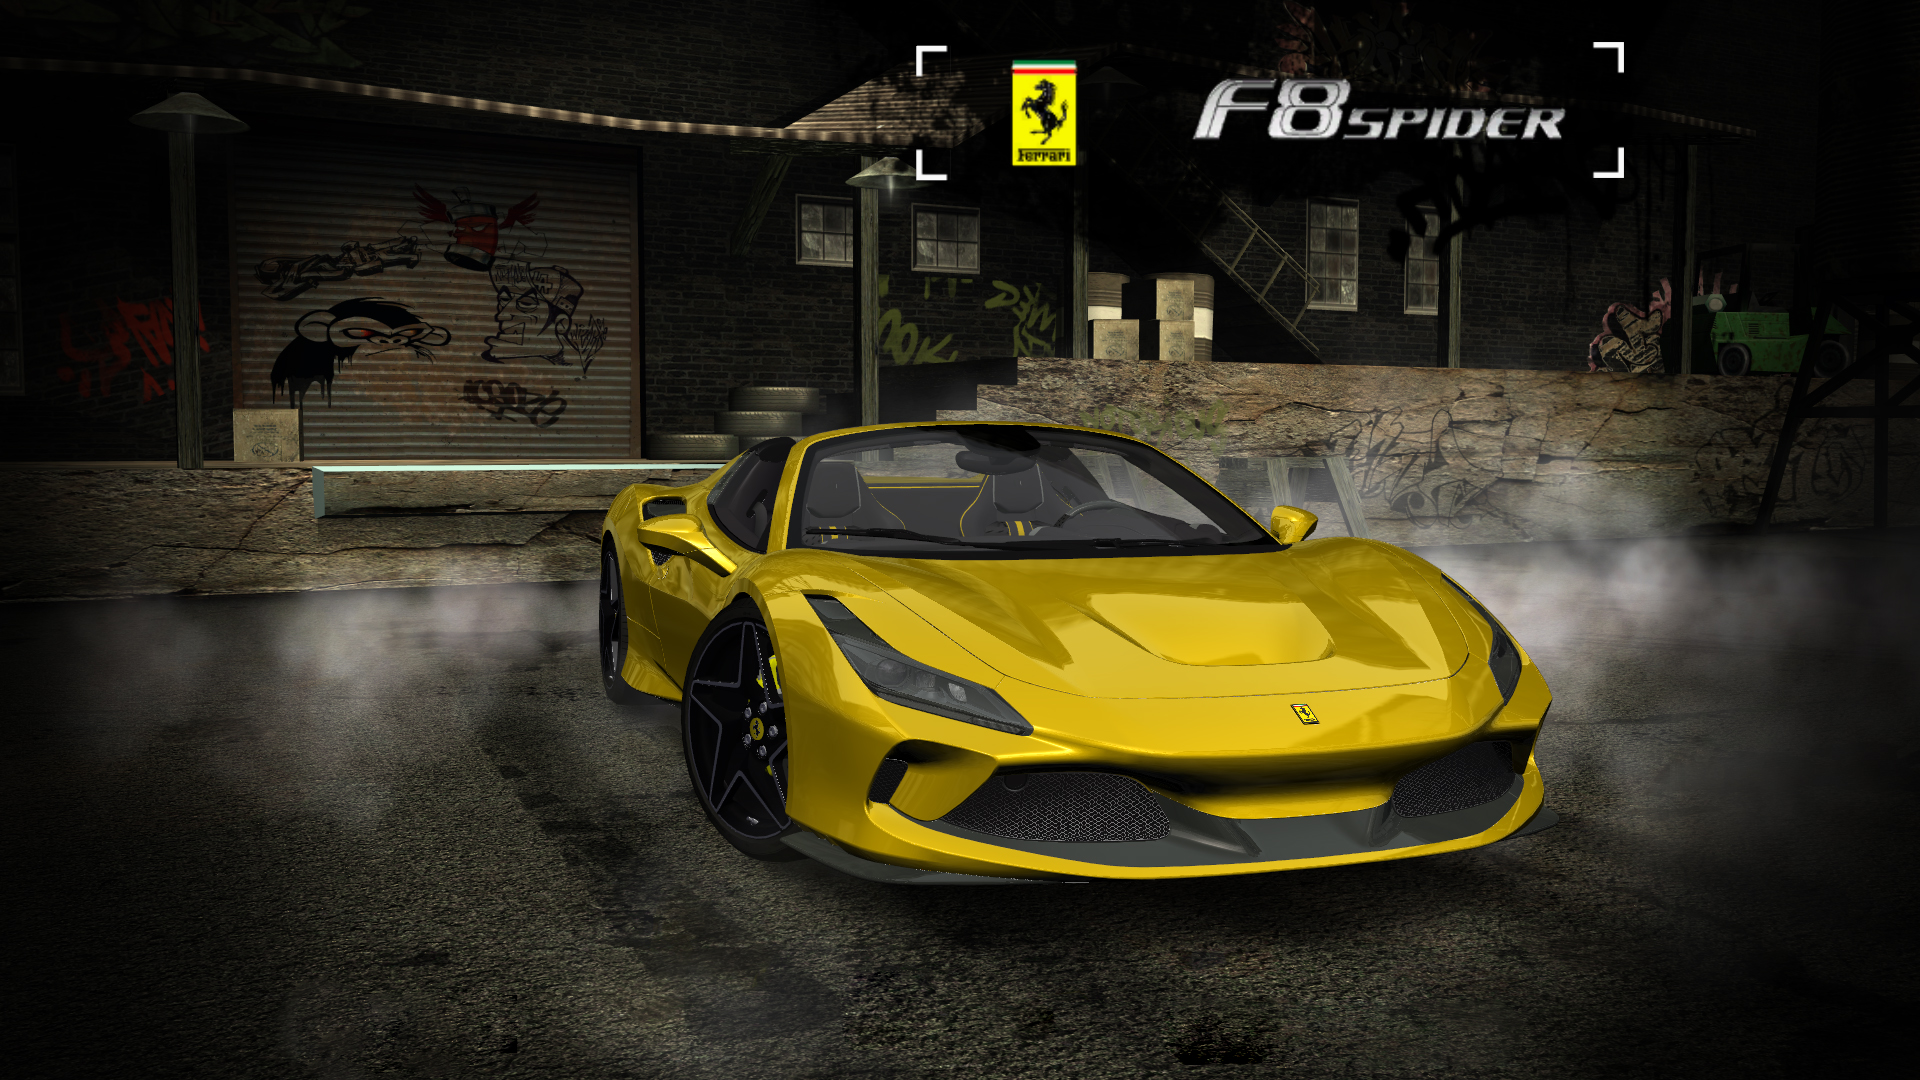 Need For Speed Most Wanted Ferrari F8 Spider '20